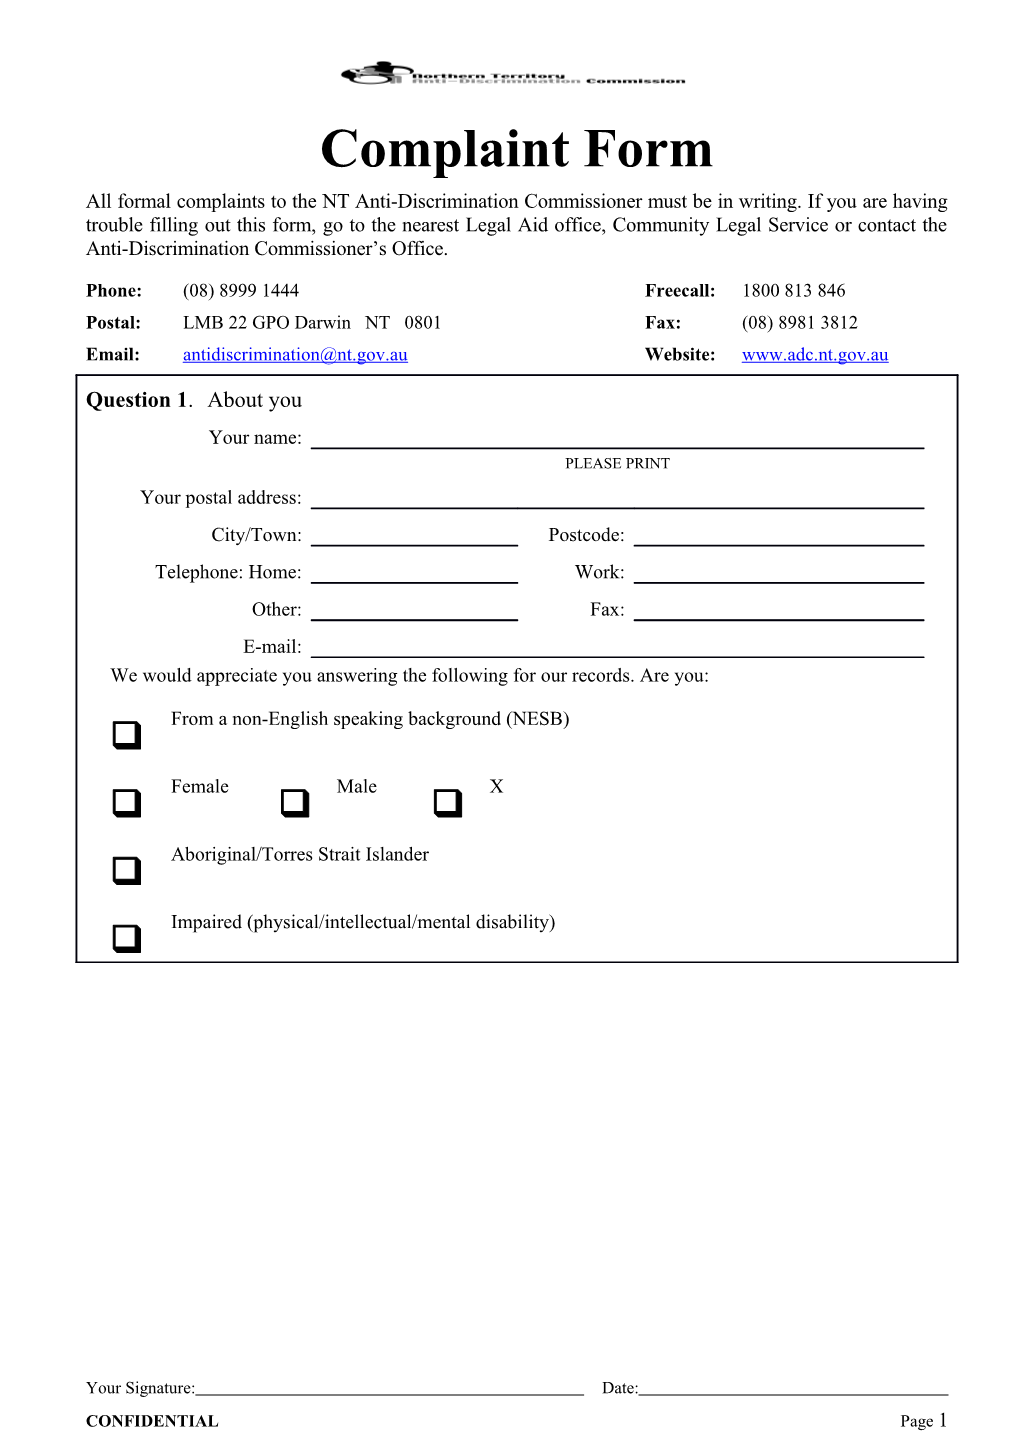 Northern Territory Anti-Discrimination Commission Complaint Form